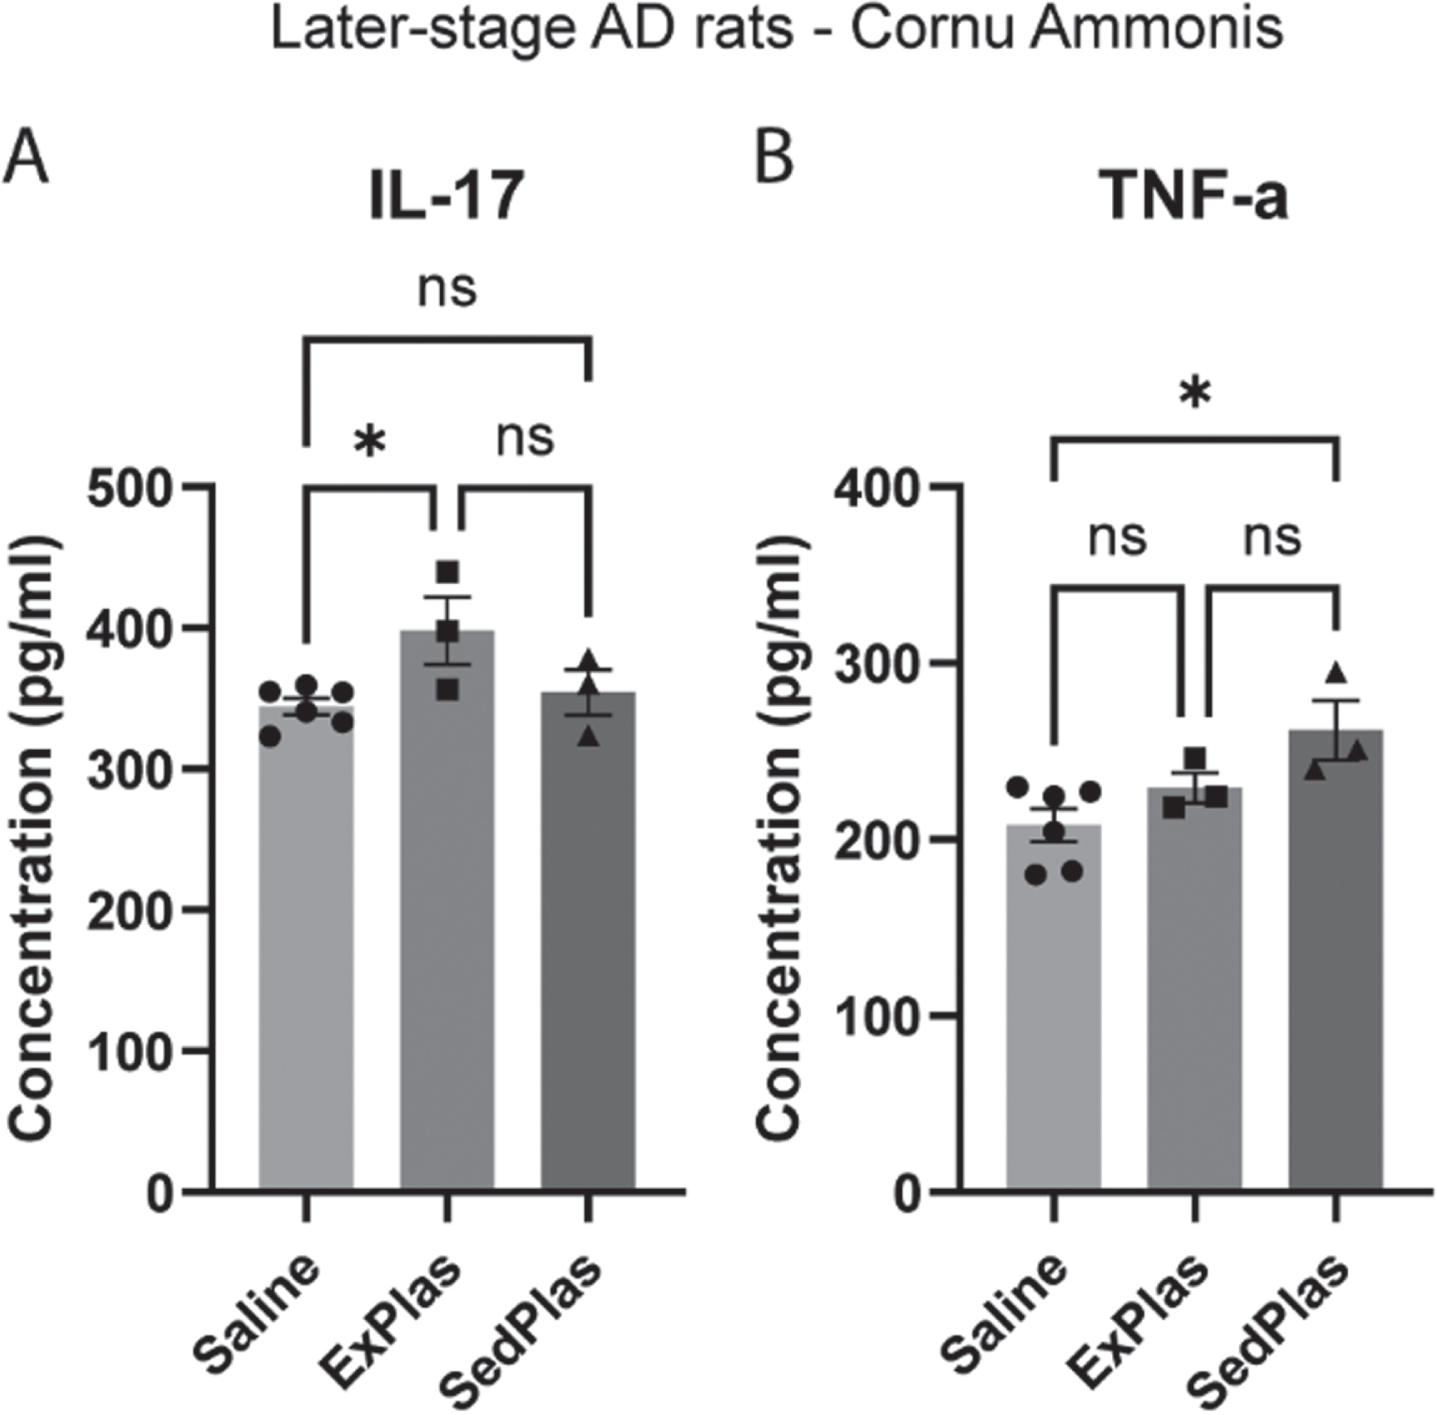 Significantly altered cytokines in the intermediate cornu ammonis of the later-stage AD rats. The levels of 23 cytokines were assessed in the intermediate cornu ammonis of later-stage AD rats treated with saline (n = 6), ExPlas (n = 3), or SedPlas (n = 3) injections. Only IL-17 (A) and TNF-α (B) showed significant differences between the treatment groups. One-way ANOVA with Tukey’s multiple comparisons test, *p <  0.05.